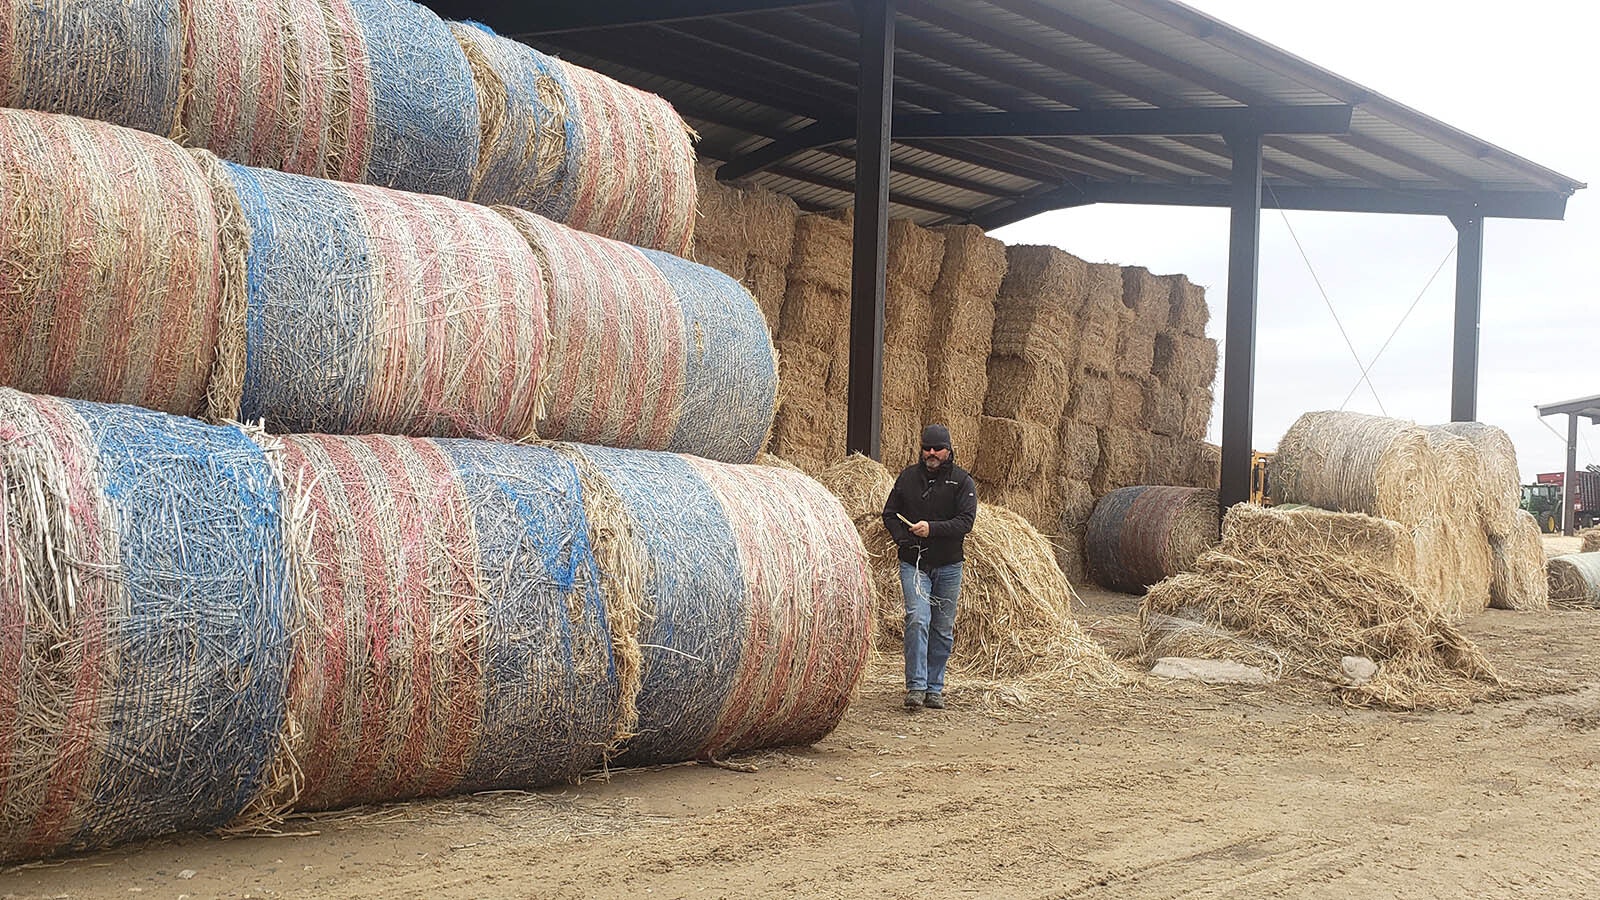 Loeffler has a years worth of hemp accumulated on his location in Hawk Springs where he is setting up a hemp elevator to process and market hemp fiber